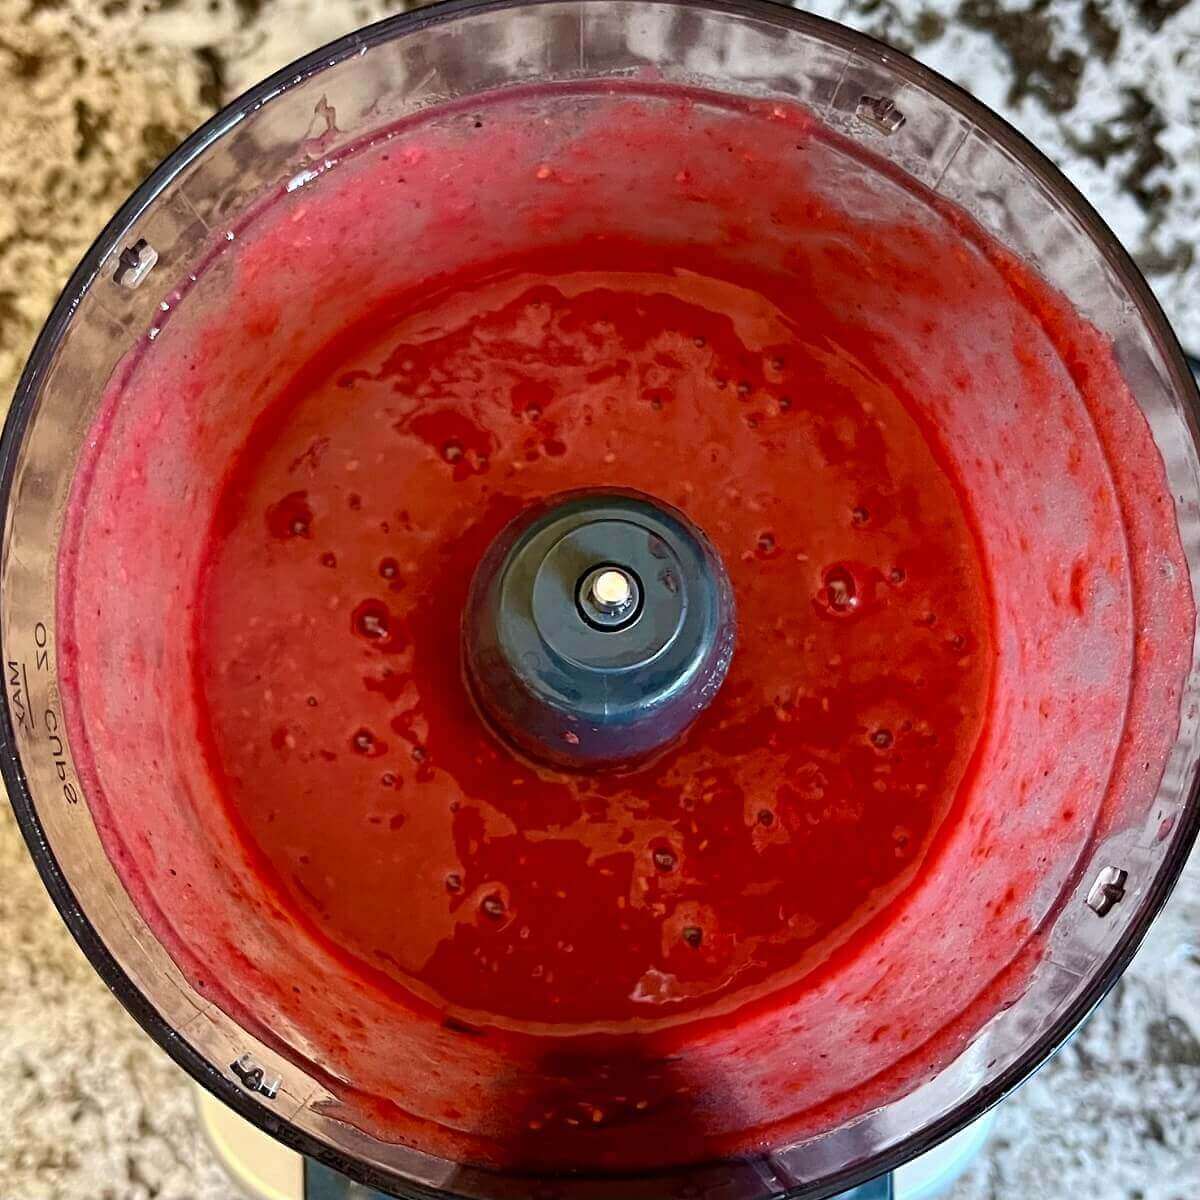 A raspberry mixture blended in a food processor.